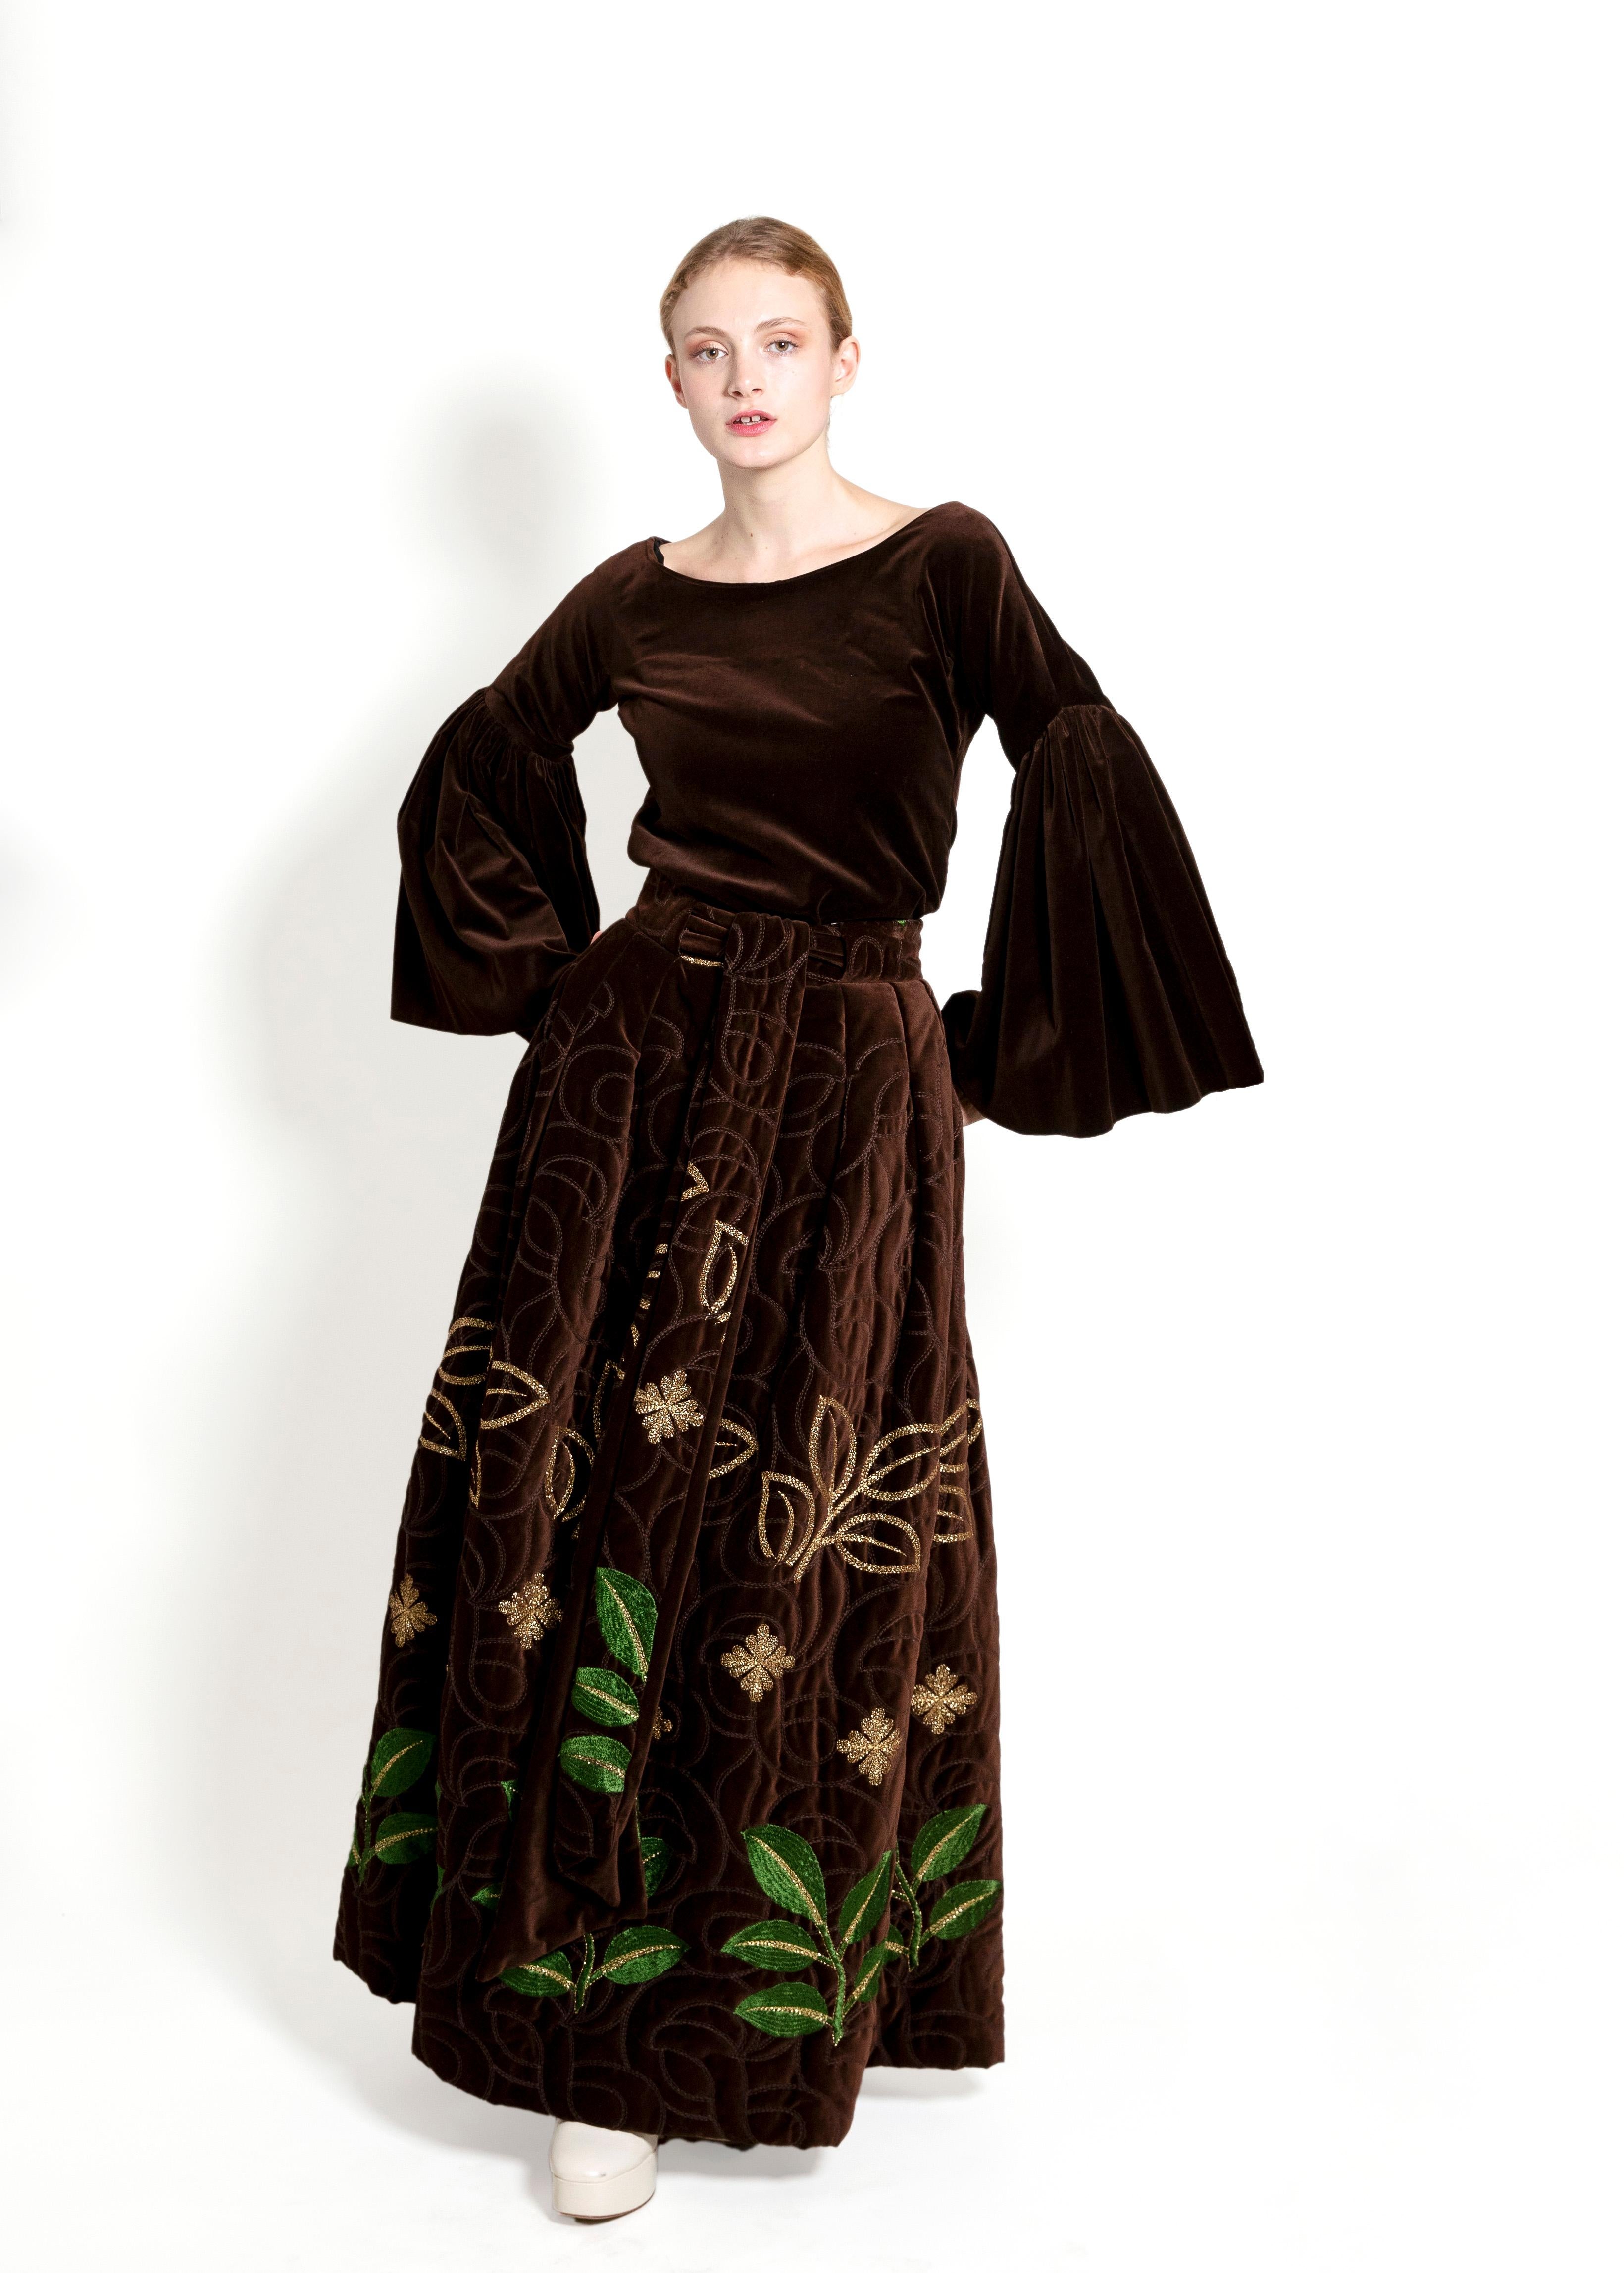 Experience the subtle elegance of the Adolfo 1969 Choc Brn Velvet Embroidered Skirt Set. From the fall winter 1969-1970 collection, this documented masterpiece is crafted from velvet with intricate embroidery for a timeless, luxurious look. Explore